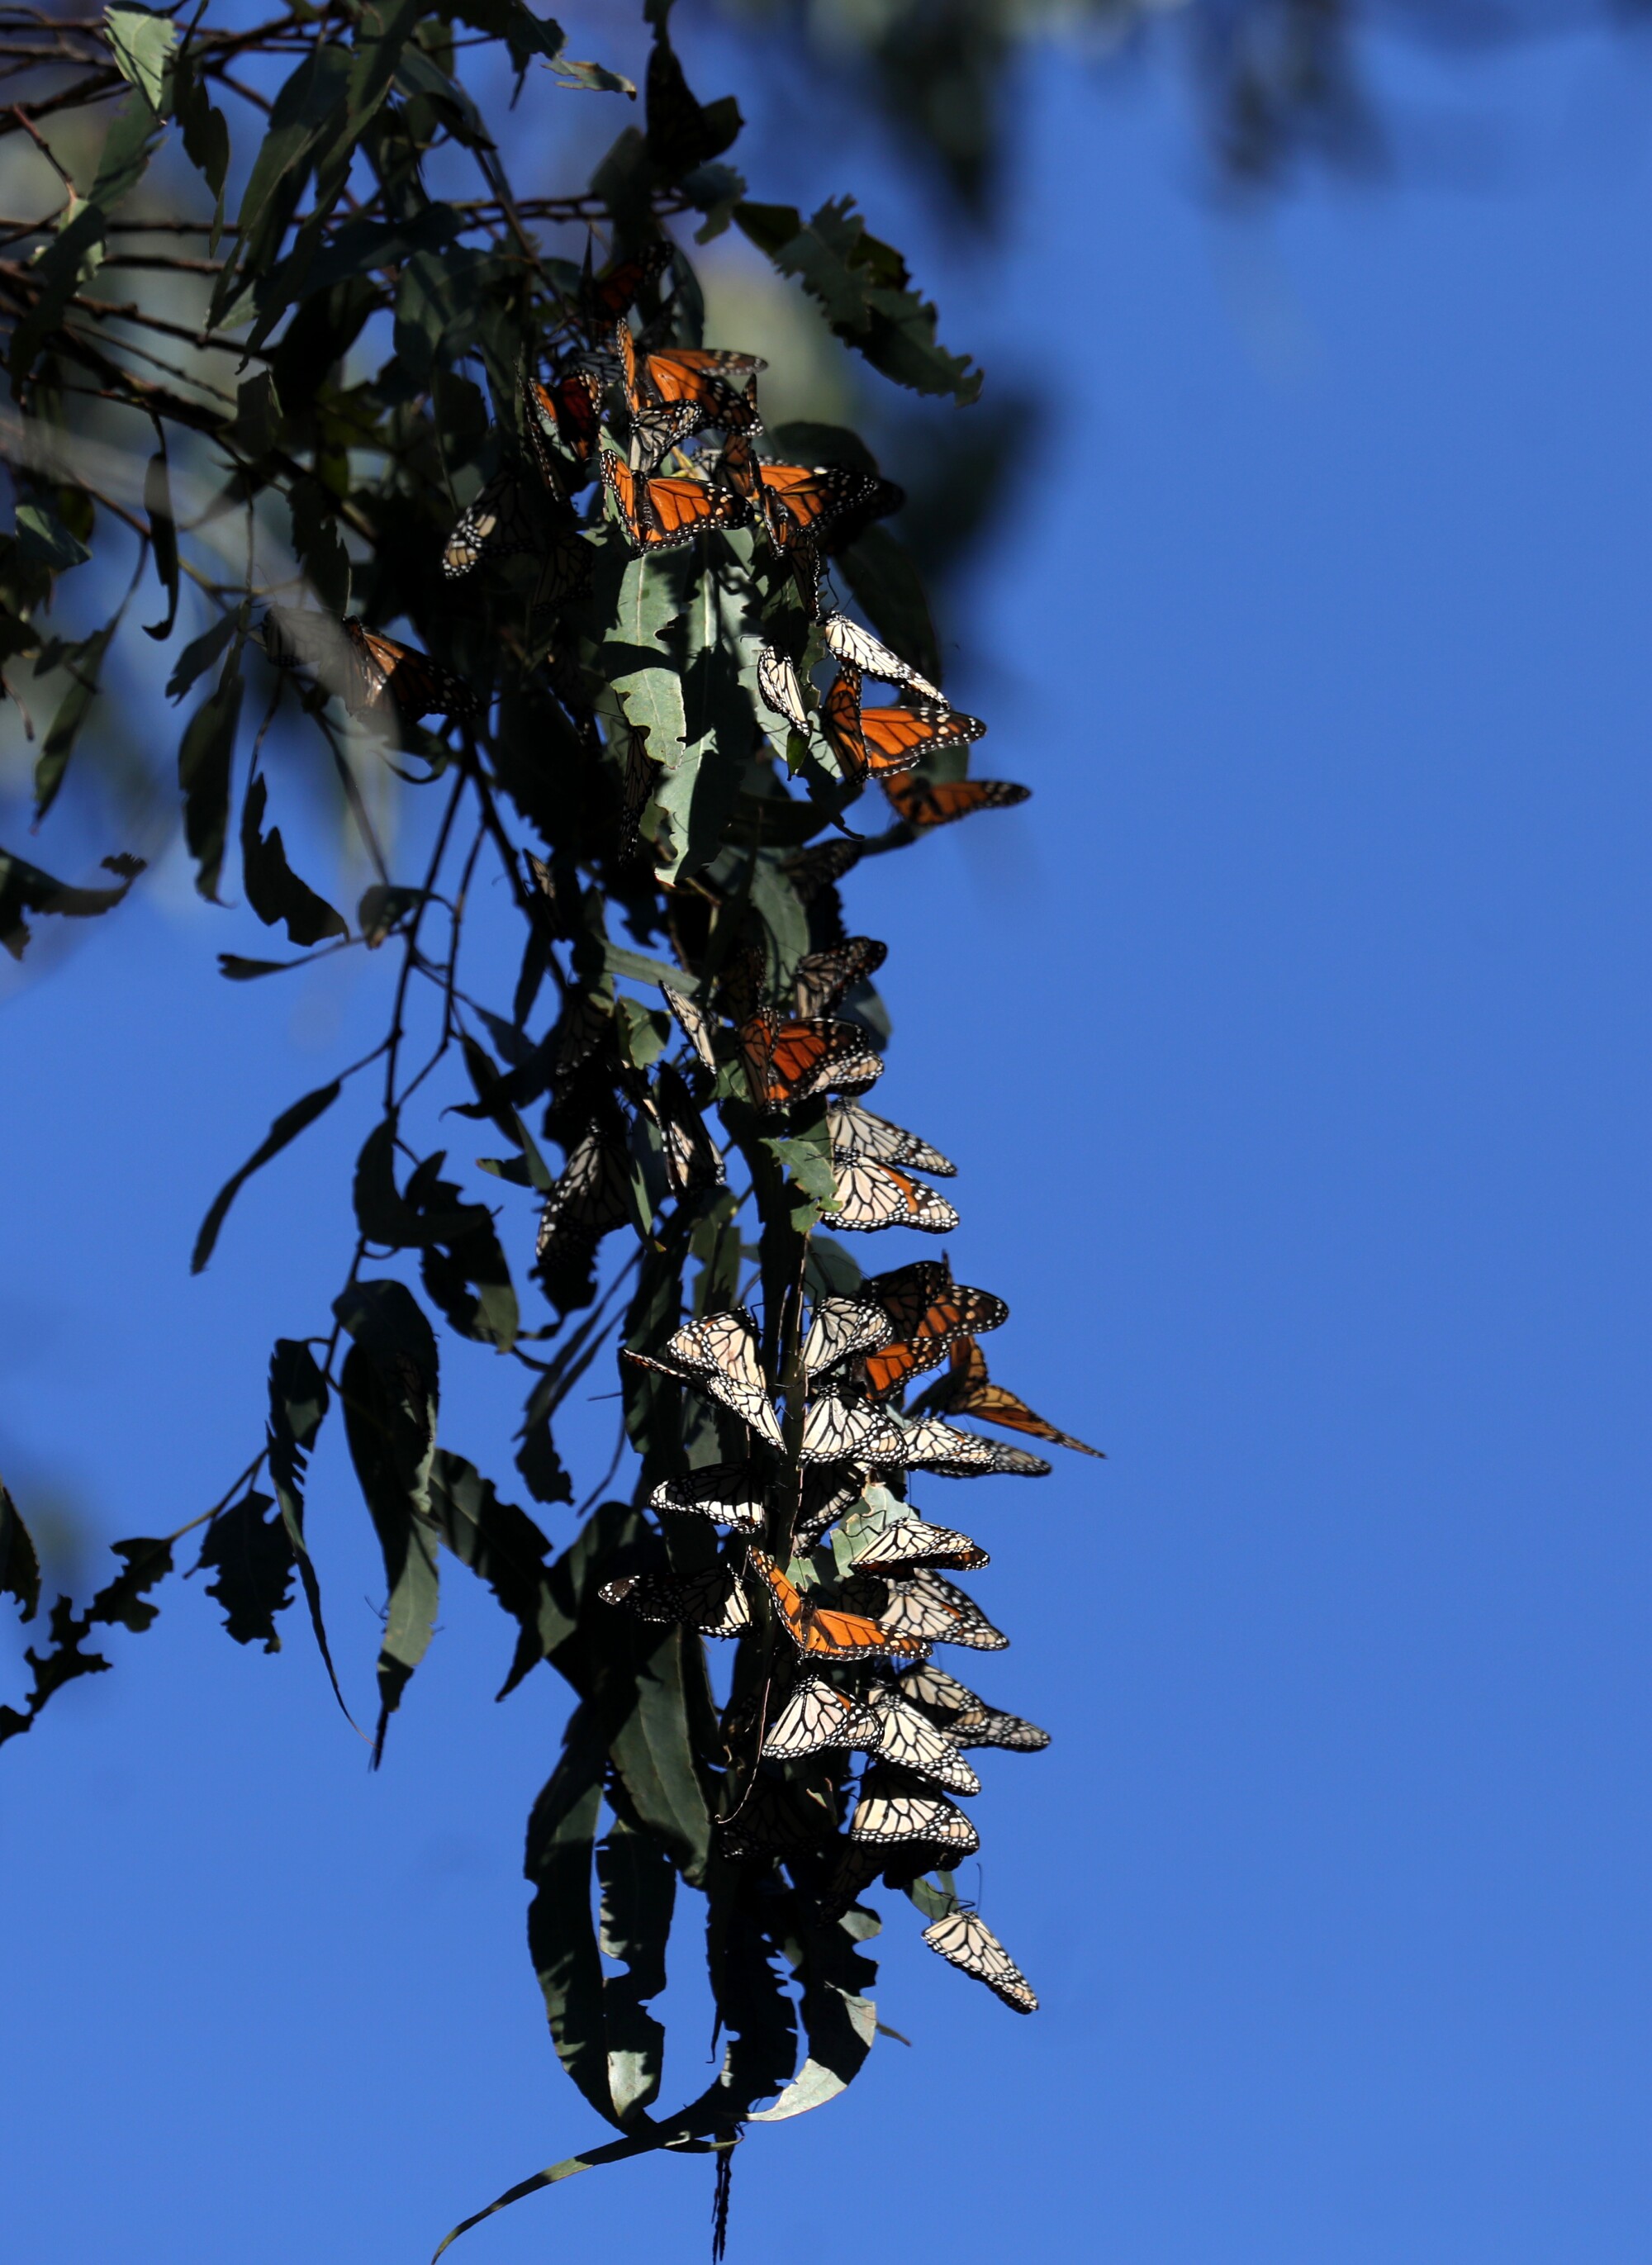 Monarchs cluster on a blue gum eucalyptus while they wait for the sun and warmer temperature to warm their wings.